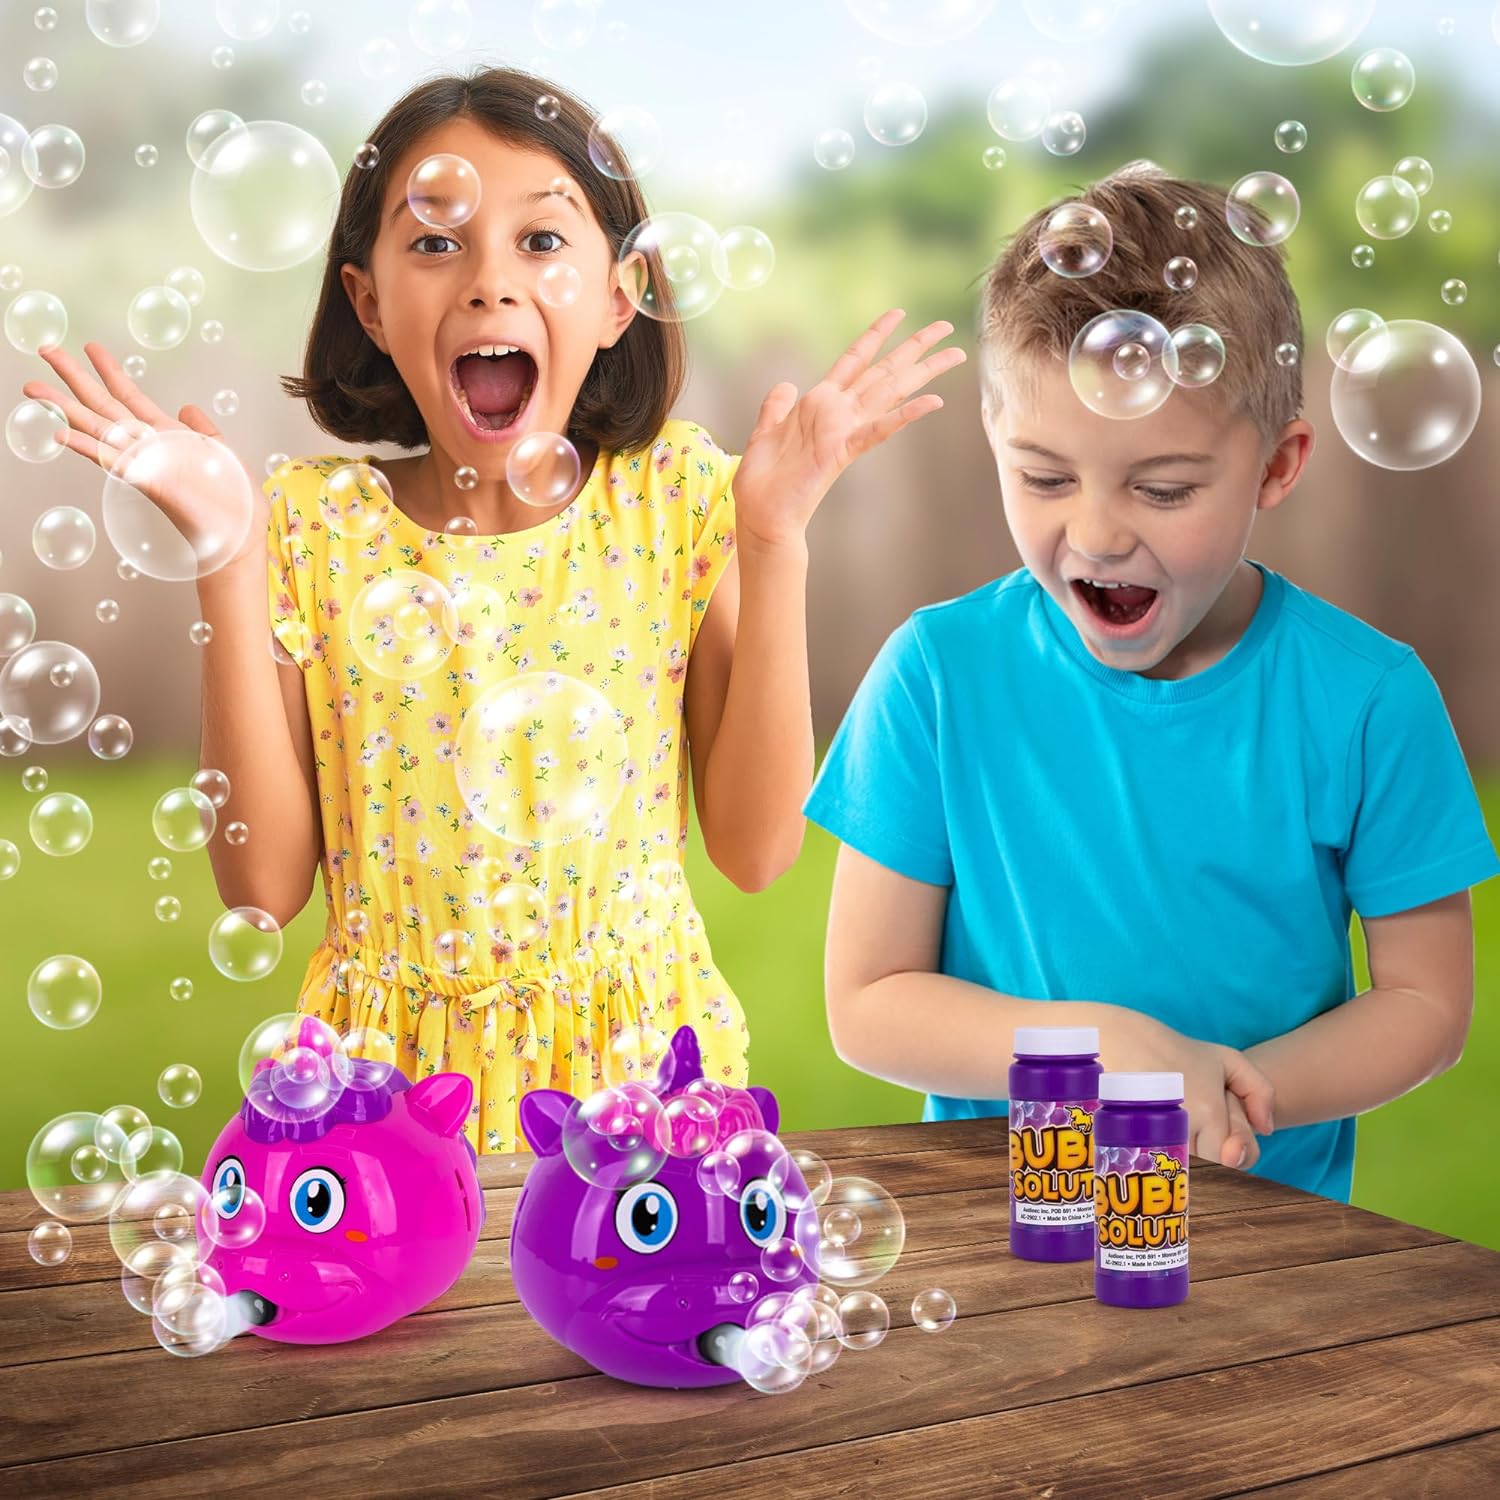 ArtCreativity Unicorn Bubble Machine for Kids, Set of 2, Bubble Blower with Bubble Solution Included, Pink & Purple Unicorn Bubble Toys for Girls & Boys, Princess Party Favors & Goodie Bag Filler